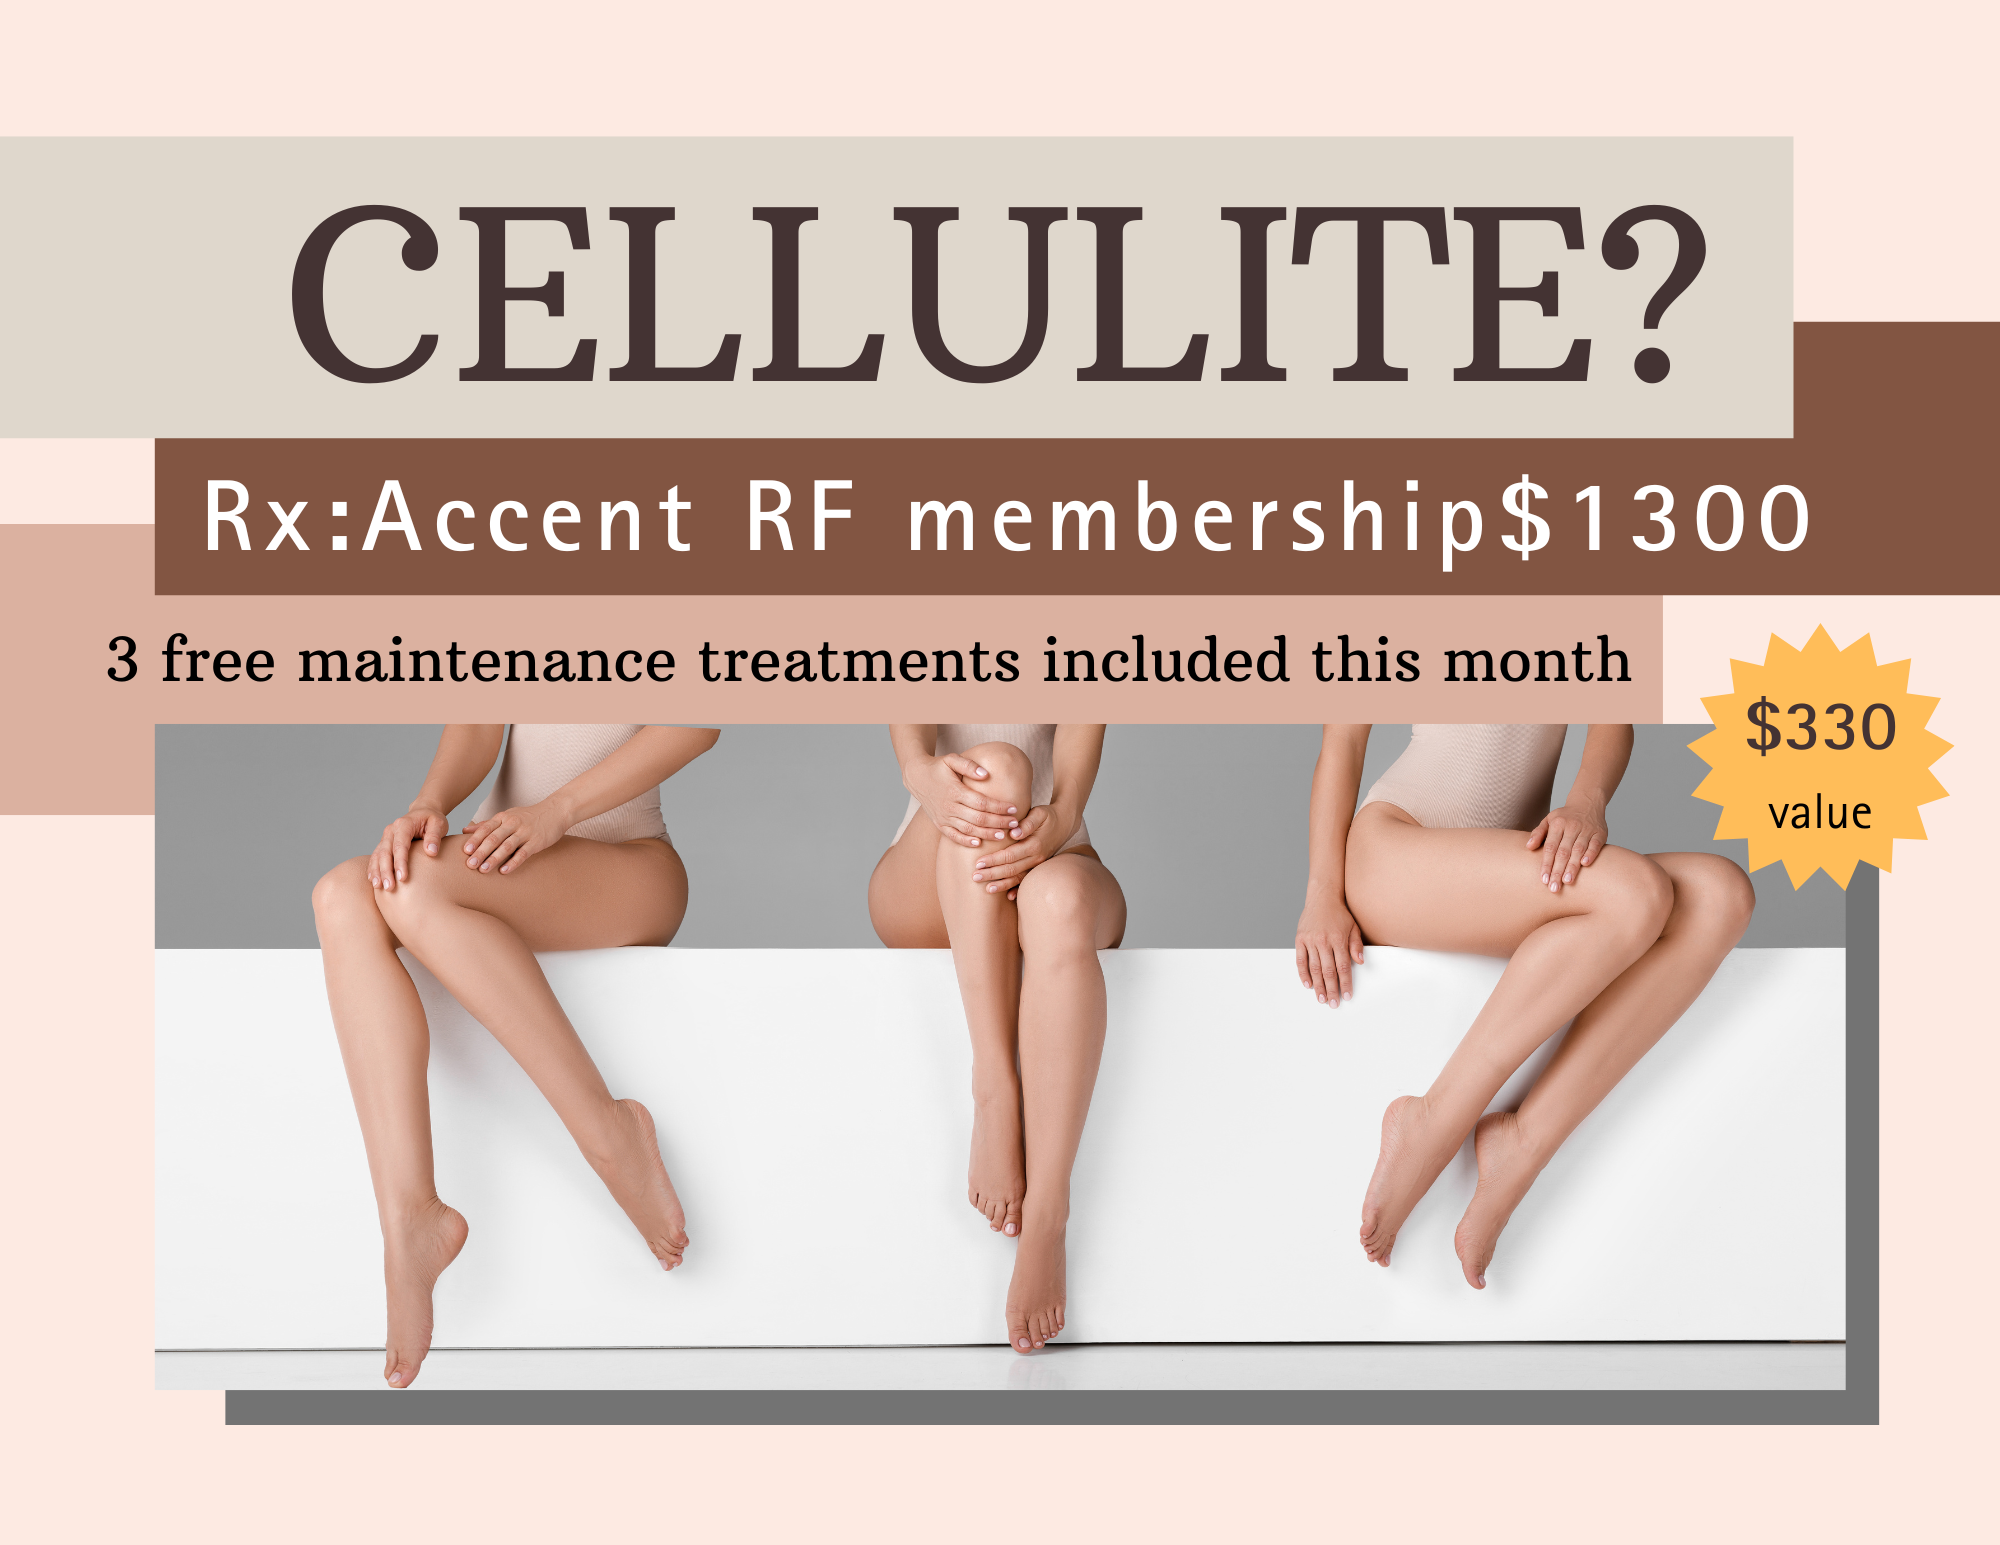 Cellulite? Accent RF membership for $1,300 and get 3 free maintenance treatments - value of $330